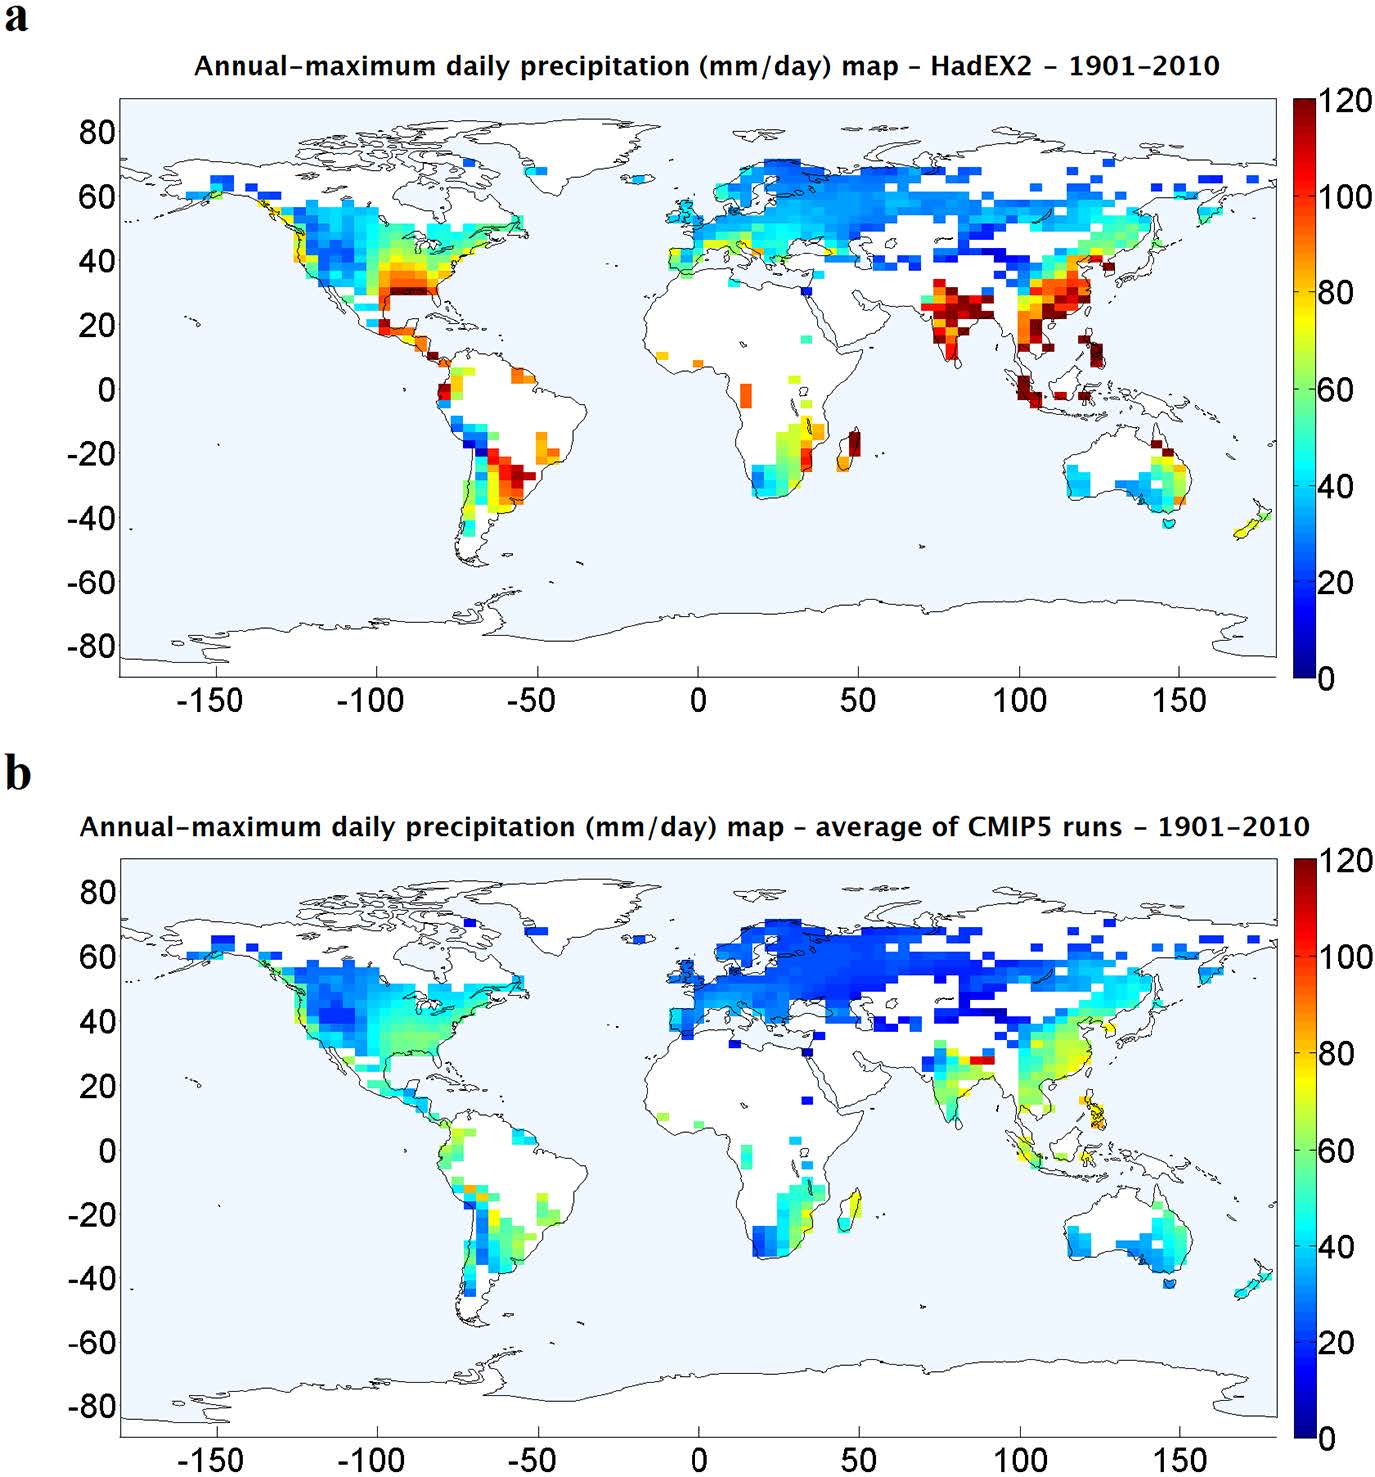 HadEX2 observational data versus CMIP5 averaged results of global extreme precipitation in 1901–2010 – annual-maximum daily precipitation map (mm day-1) for (a) HadEX2 and (b) the average of CMIP5 model runs.